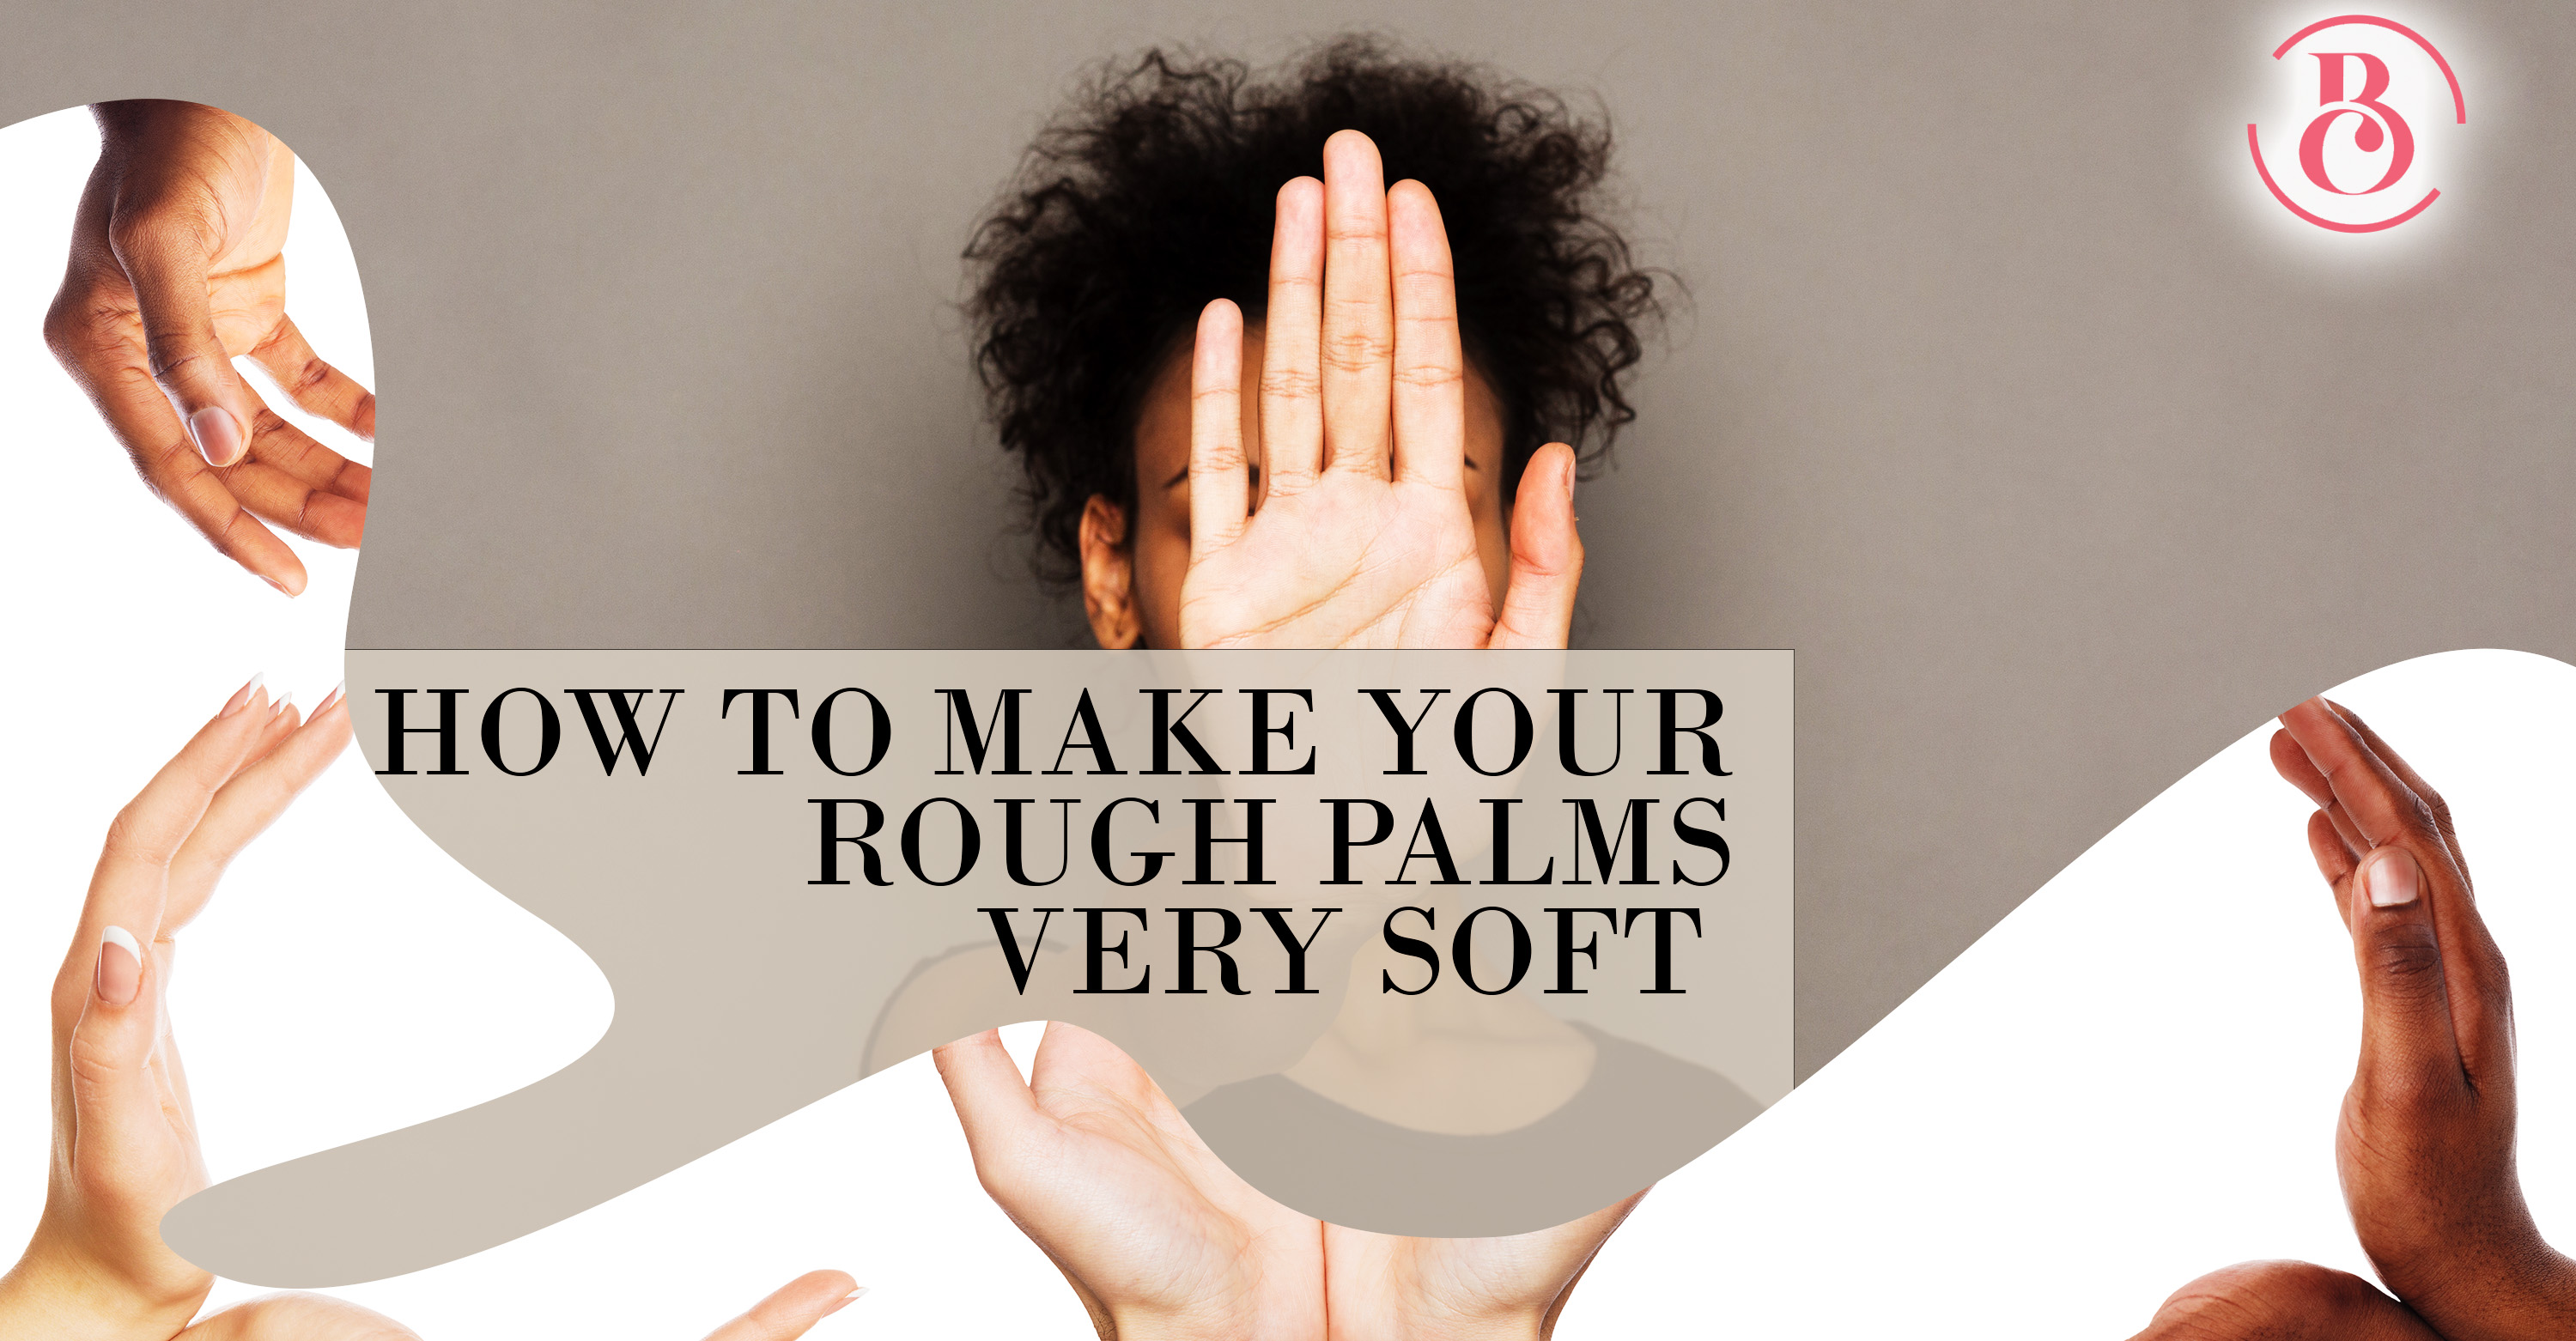 9 Ways to Make Your Rough Palms Very Soft